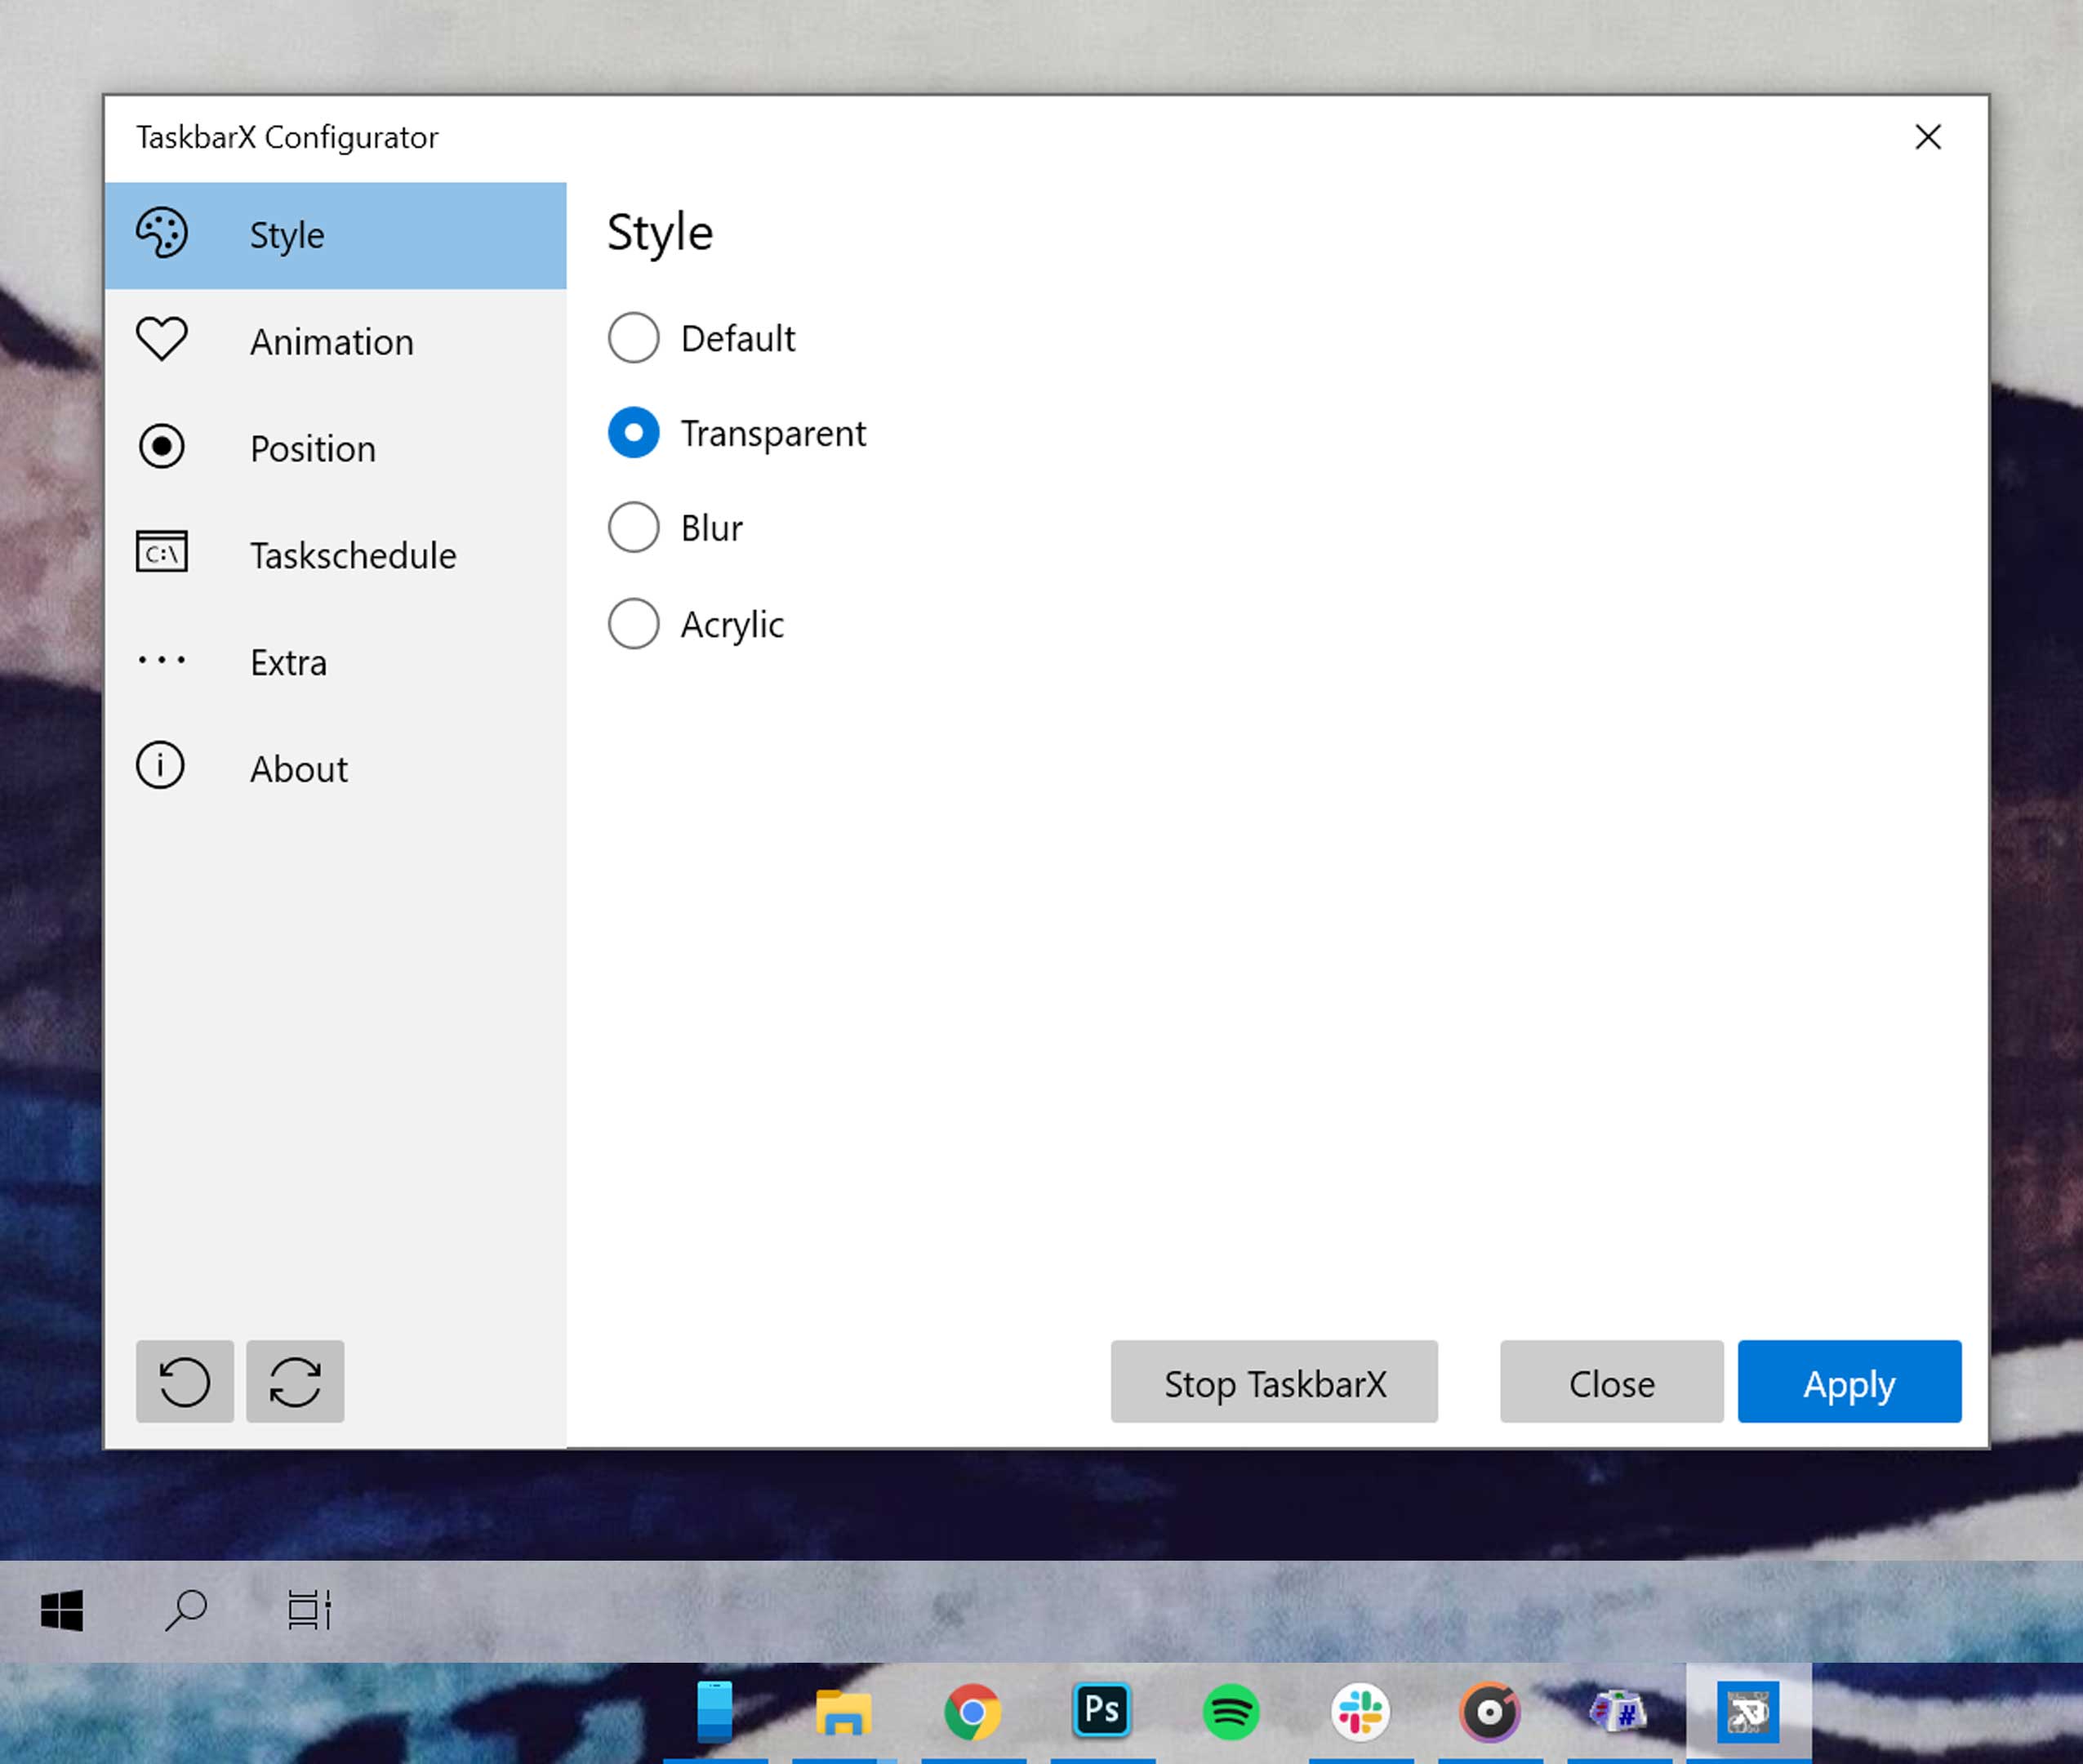 How to make Windows 10 a little more like macOS